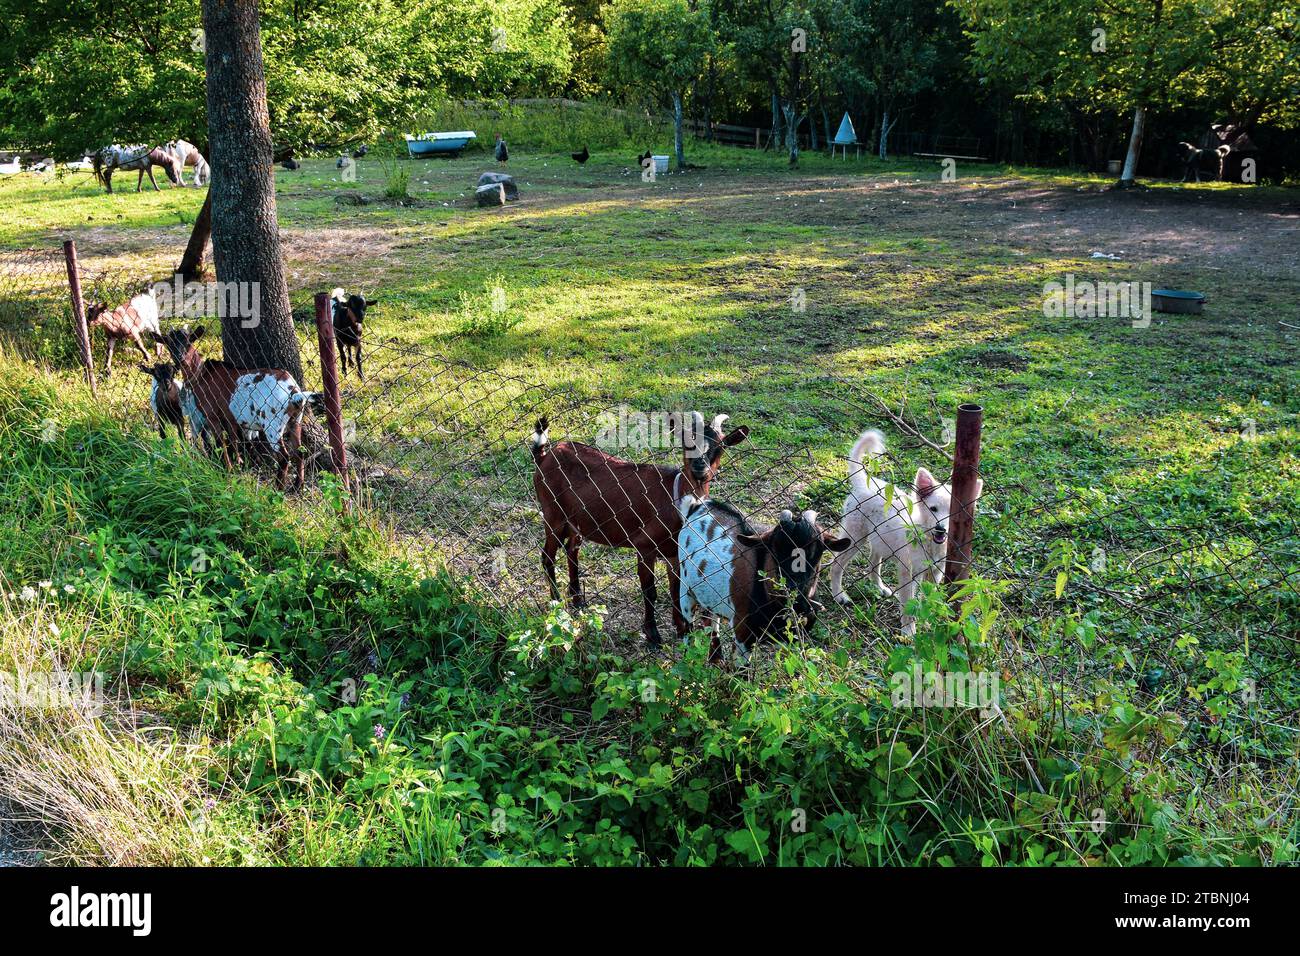 Domestic animals in a wire-fenced country yard. Green grass and old water buckets. The lush greenery around the yard. Stock Photo